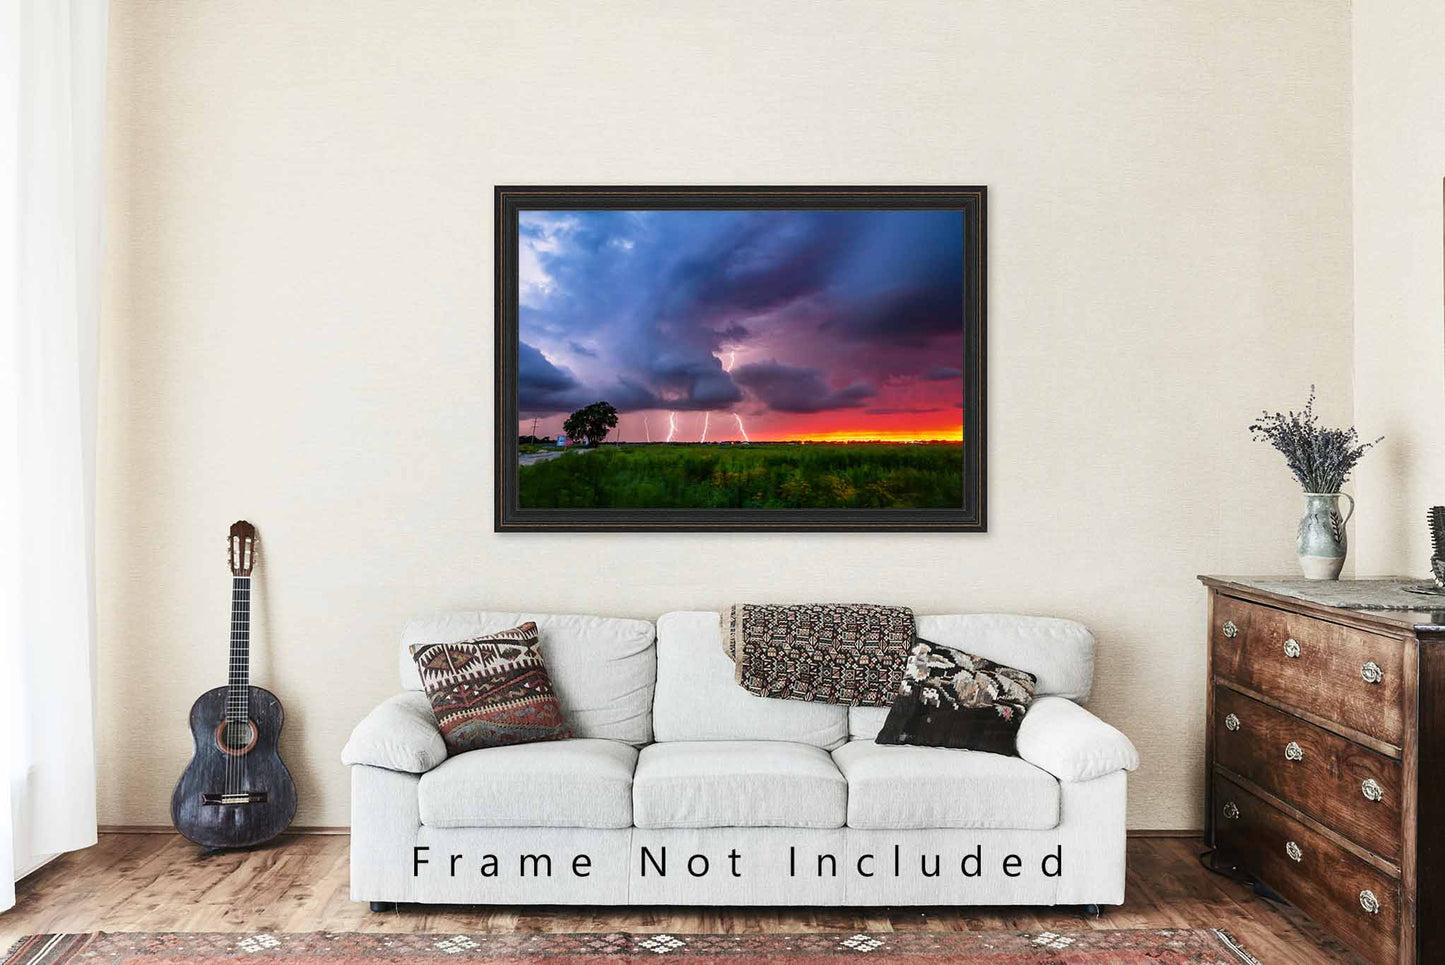 Storm Photography Print | Multiple Lightning Strikes Picture | Stormy Sunset Wall Art | Oklahoma Photo | Thunderstorm Decor | Not Framed